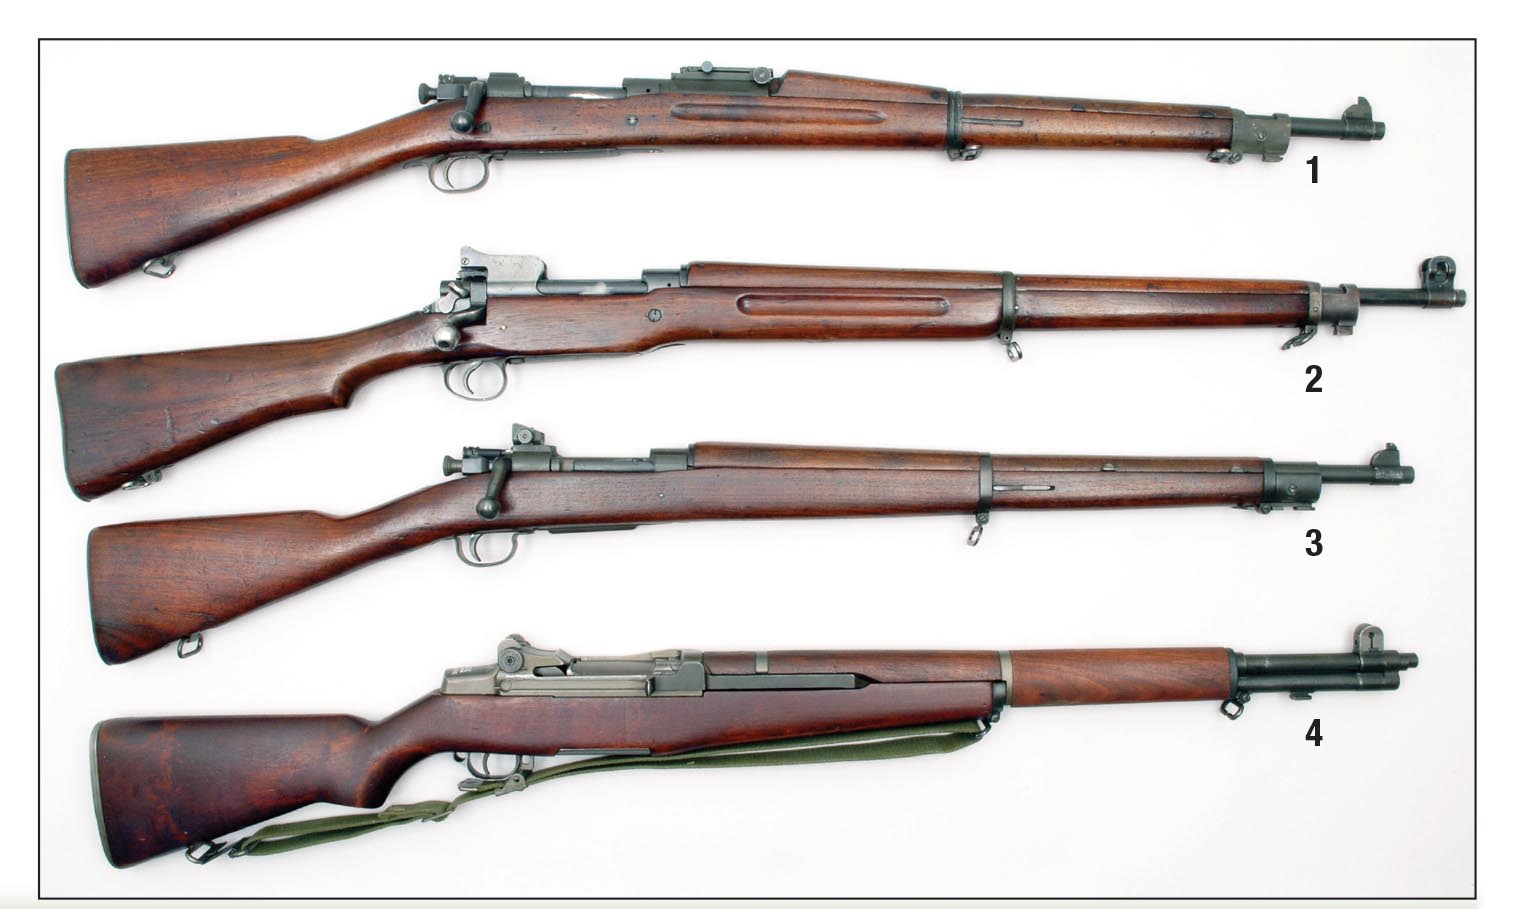 These four rifles were the most abundant .30-06 infantry rifles used by American troops between 1906 and the late 1950s: (1) Model 1903, (2) Model 1917, (3) Model 1903A3 and (4) M1.